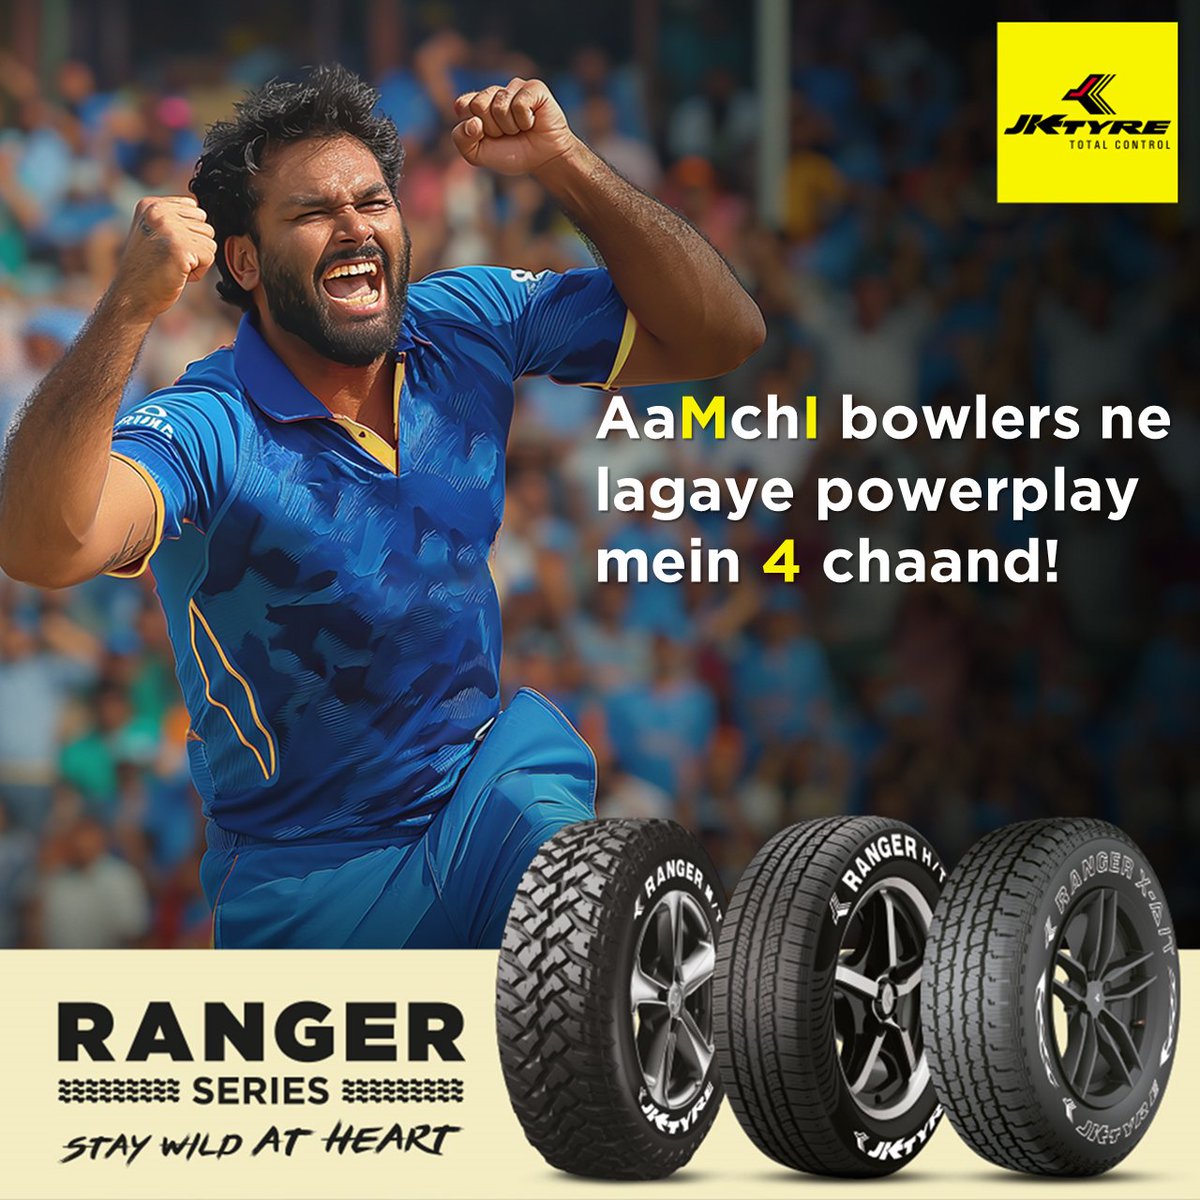 A powerful performance by Paltan  that saw 4 wickets tumbling! 
Its as wild as ride on our Ranger series Tyre!

Check out the #RangerSeries tyre from JK Tyre, built for adventures, and multiple terrains, for those who are ‘Wild at Heart’

#JKTyre #IndianT20League #Mumbai #Kolkata